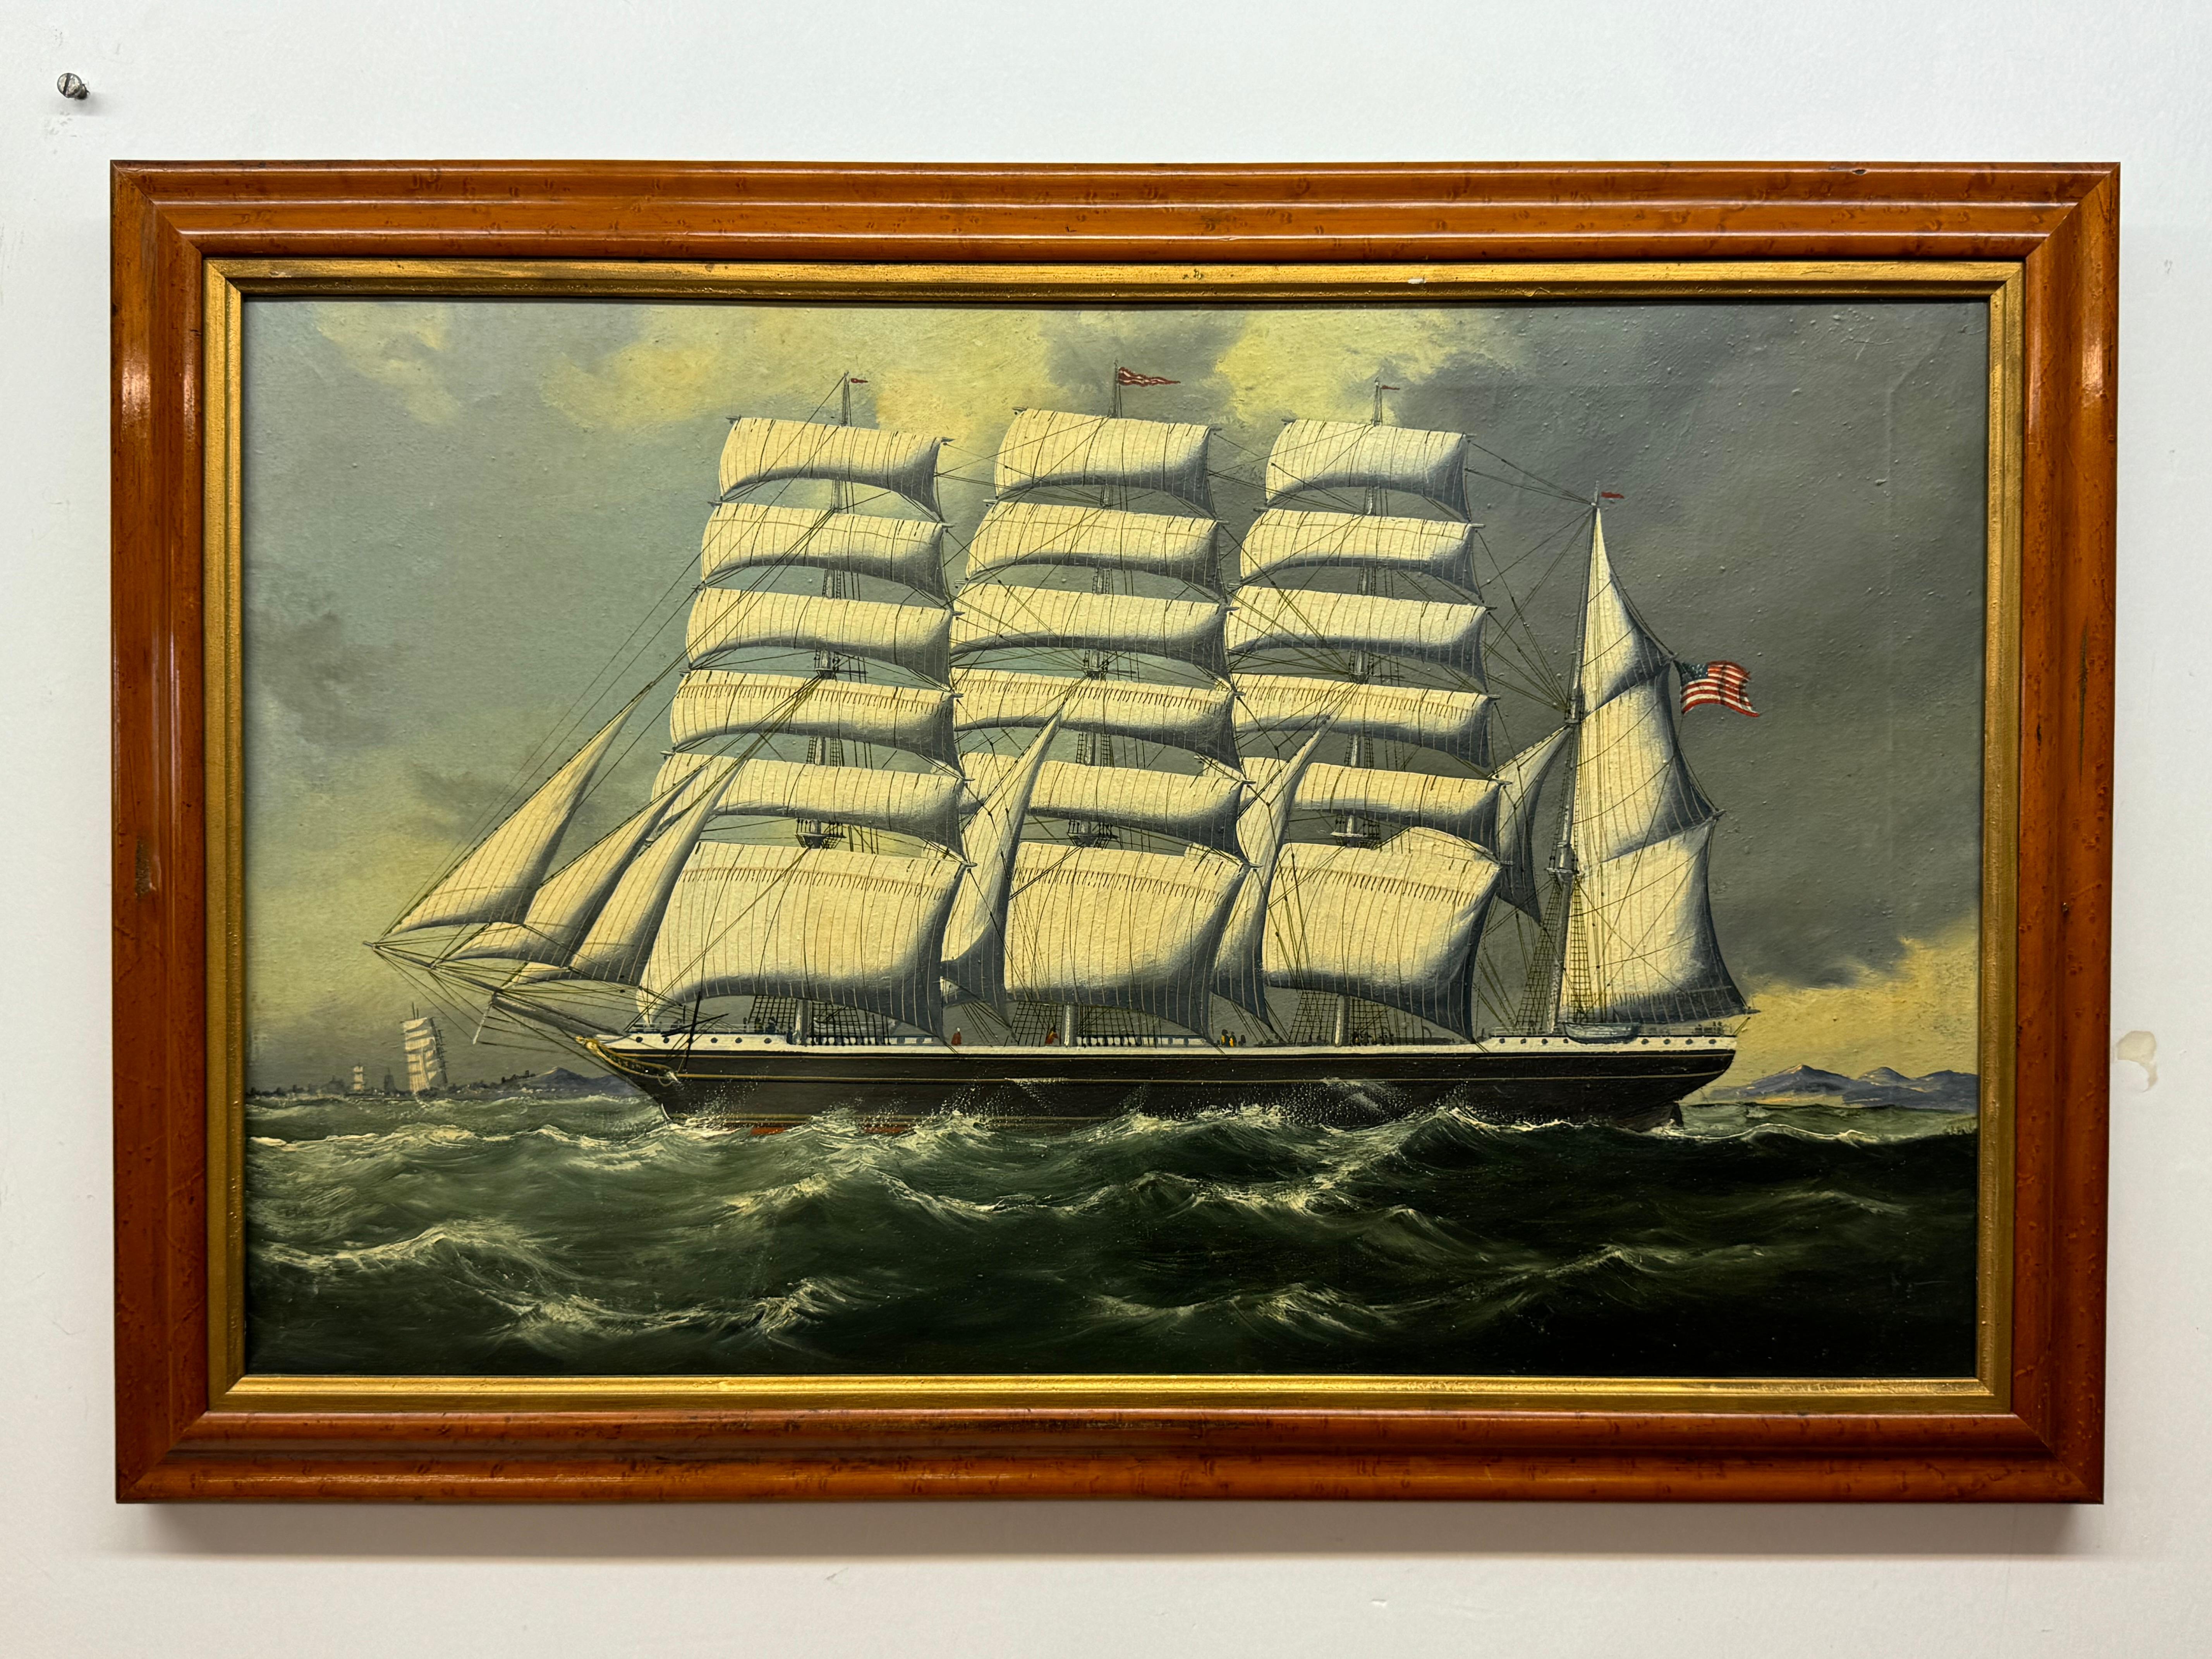 American clipper ship seascape painting, 19th century - Painting by Unknown